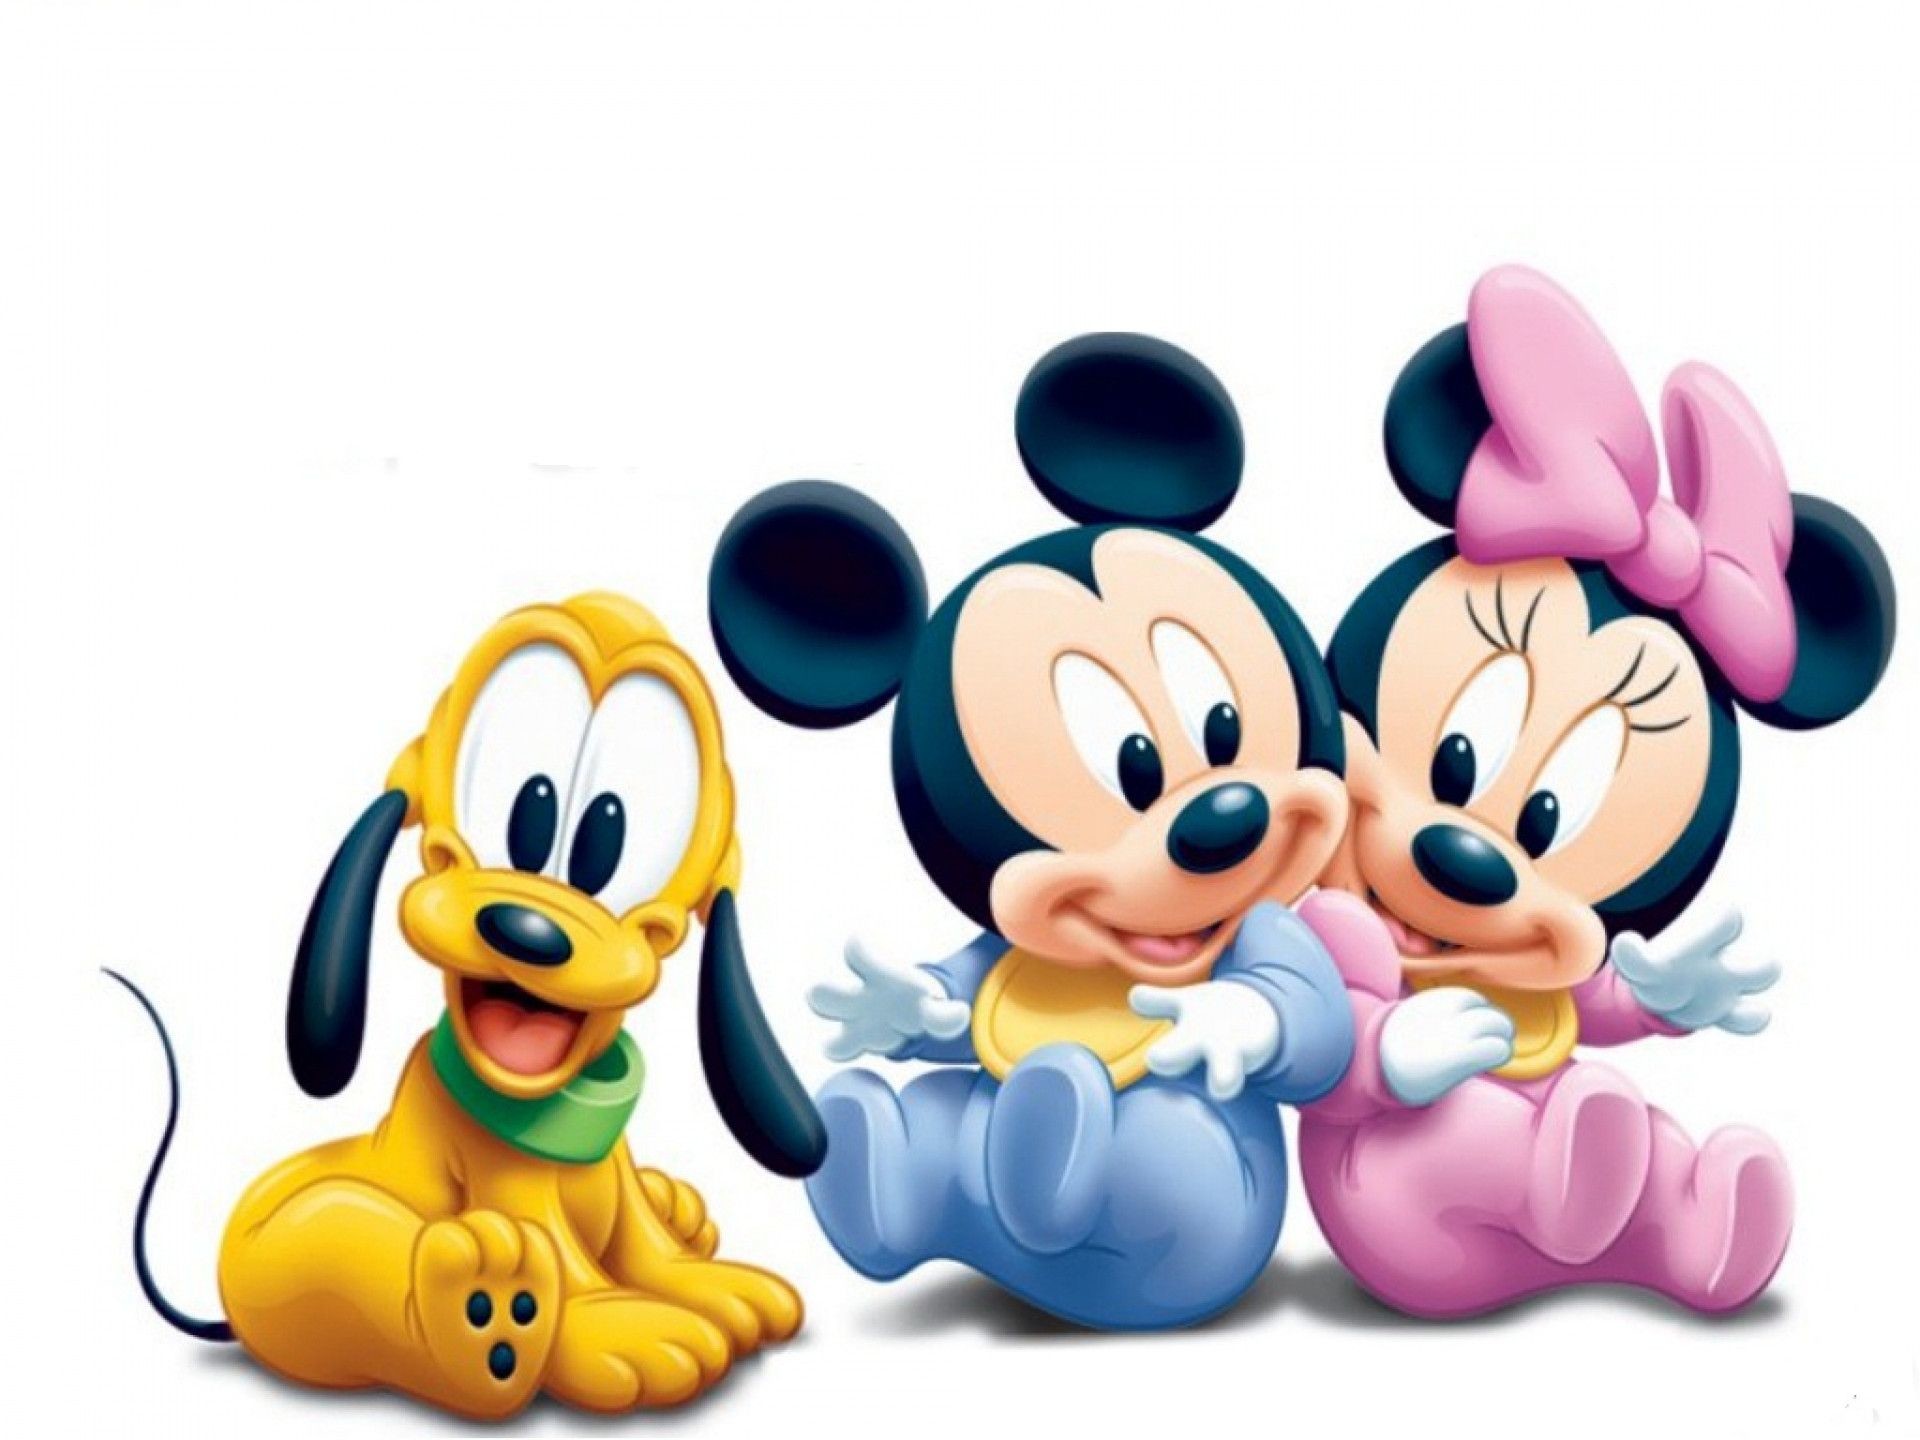 Clara Daisy Dale Donald Duck Goofy Mickey Minnie Mouse Pluto Wallpapers Mickey And Minnie Mouse Wallpapers 1920x1440